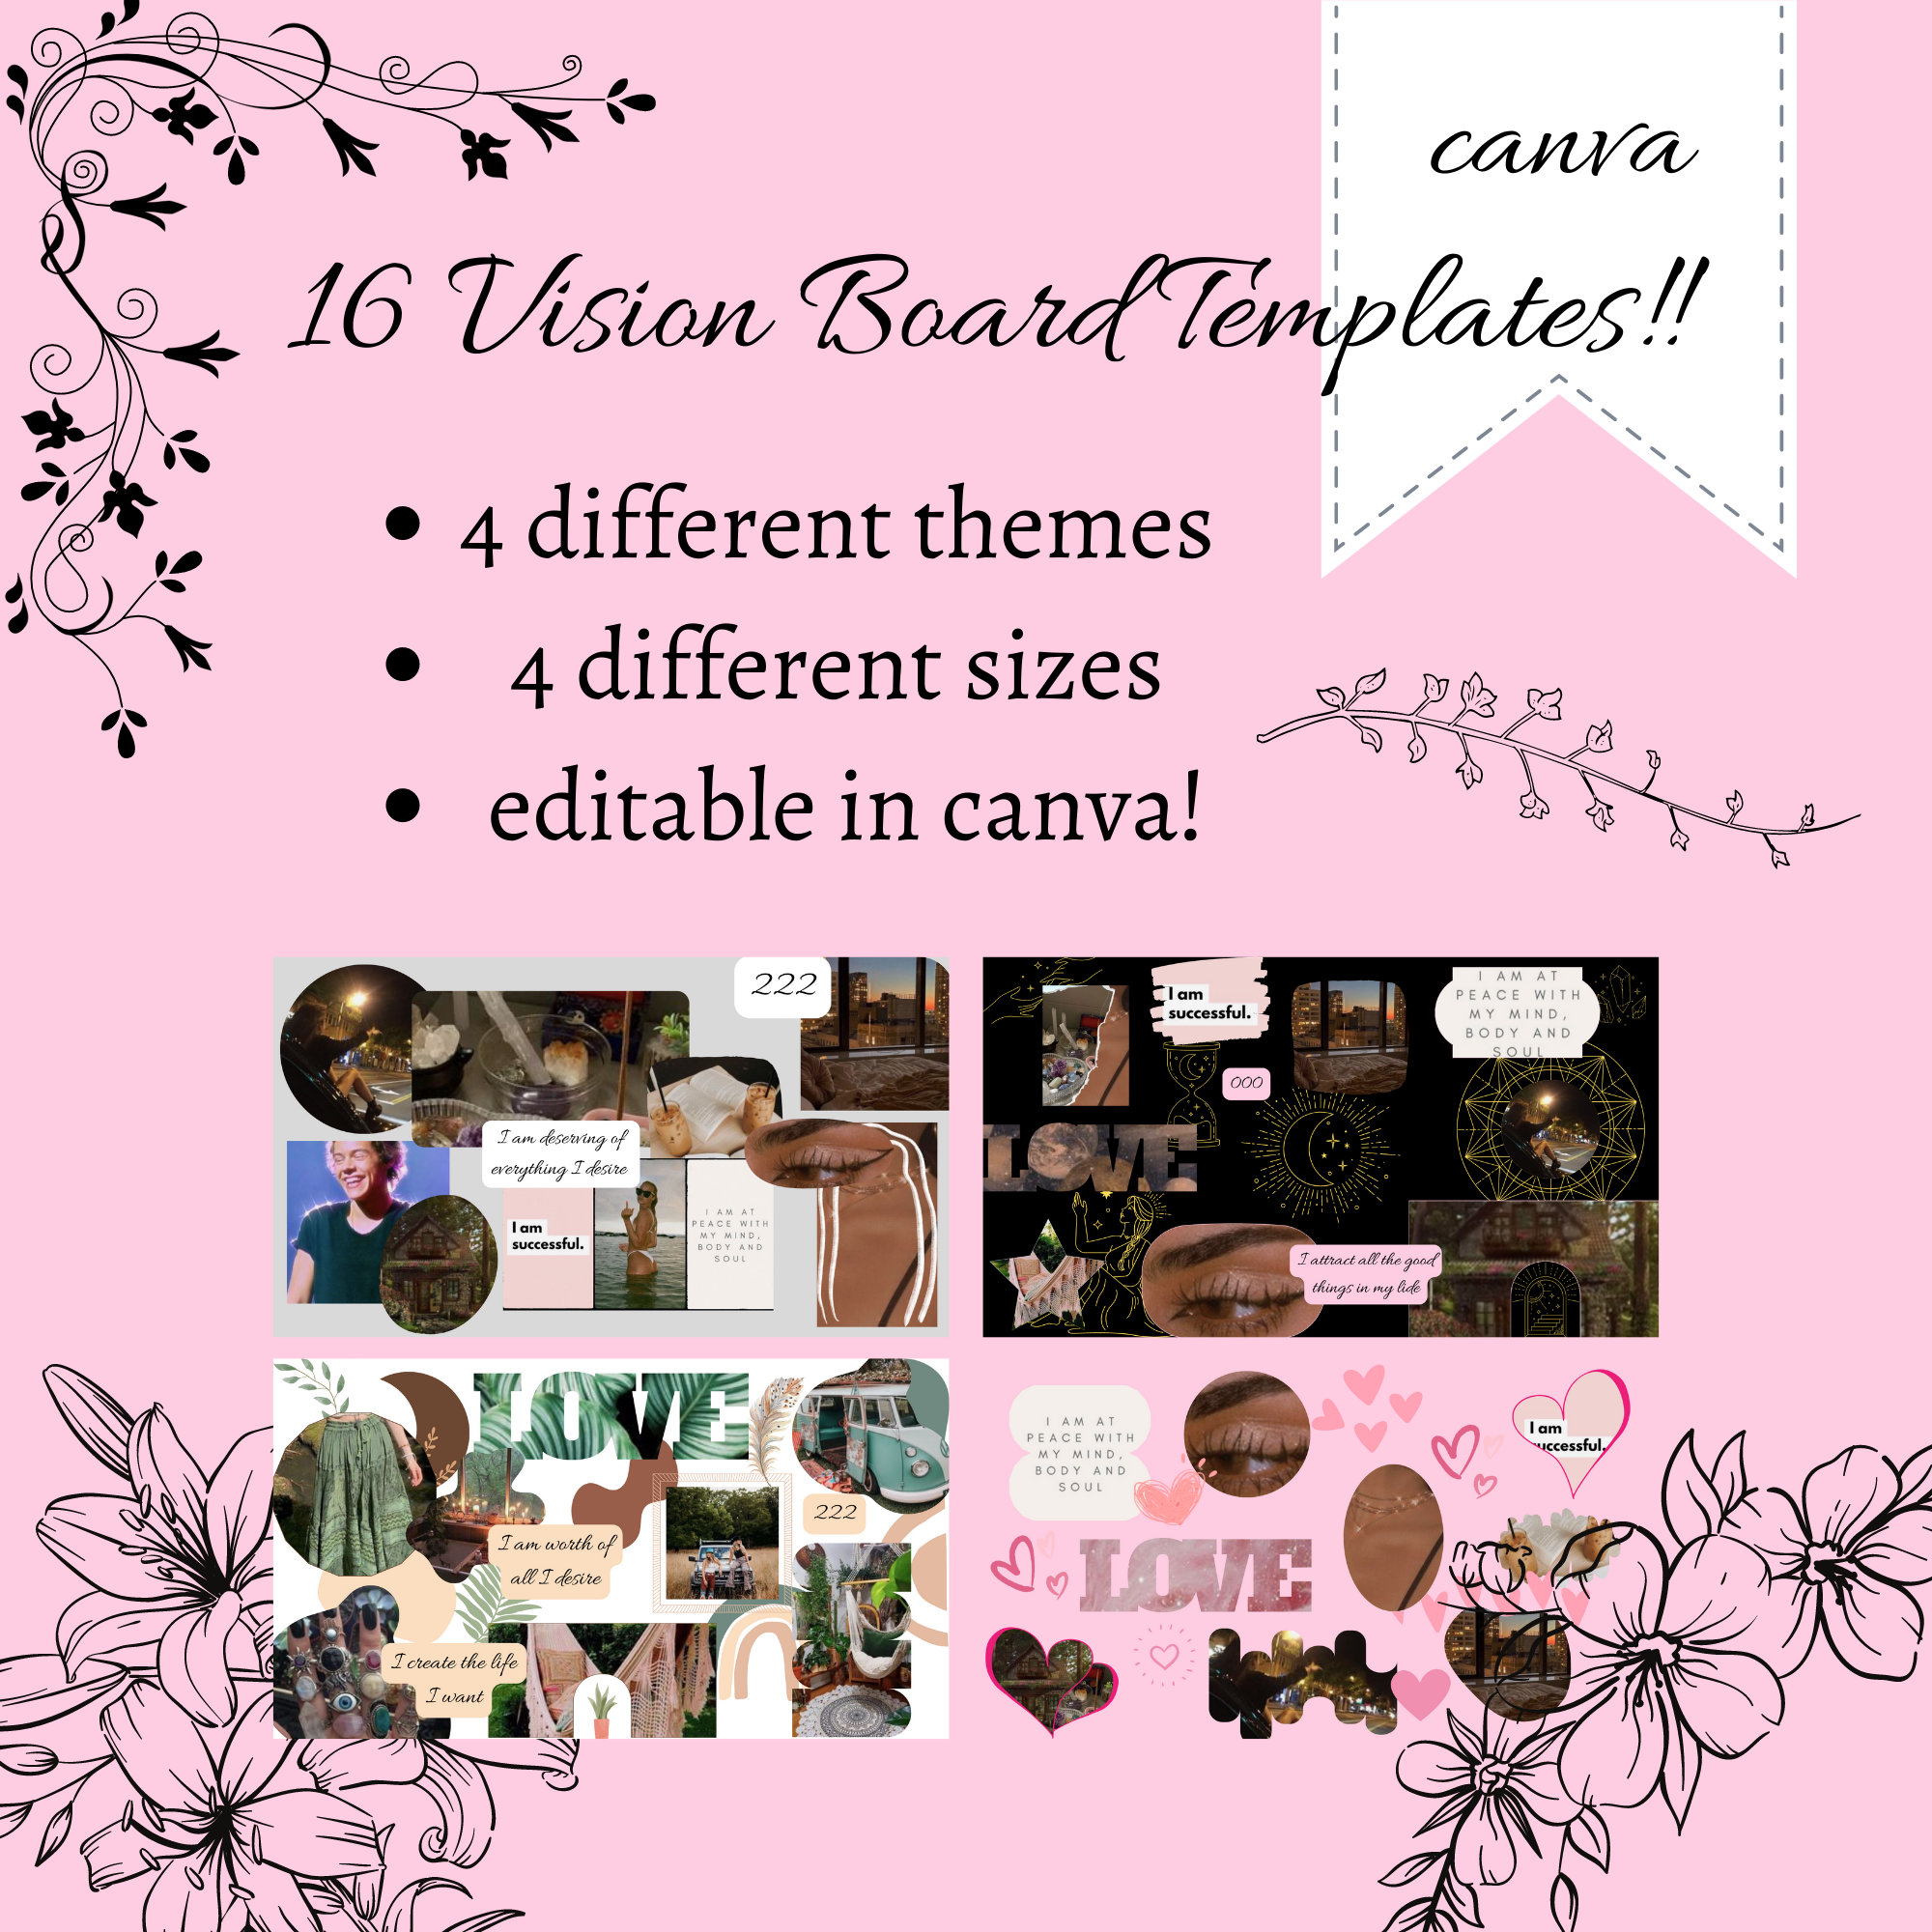 Vision Board Kit, Dream Boards With Motivational Stickers, Vision Board  Supplies, Attract Money, Love and Happiness, Dream Board 